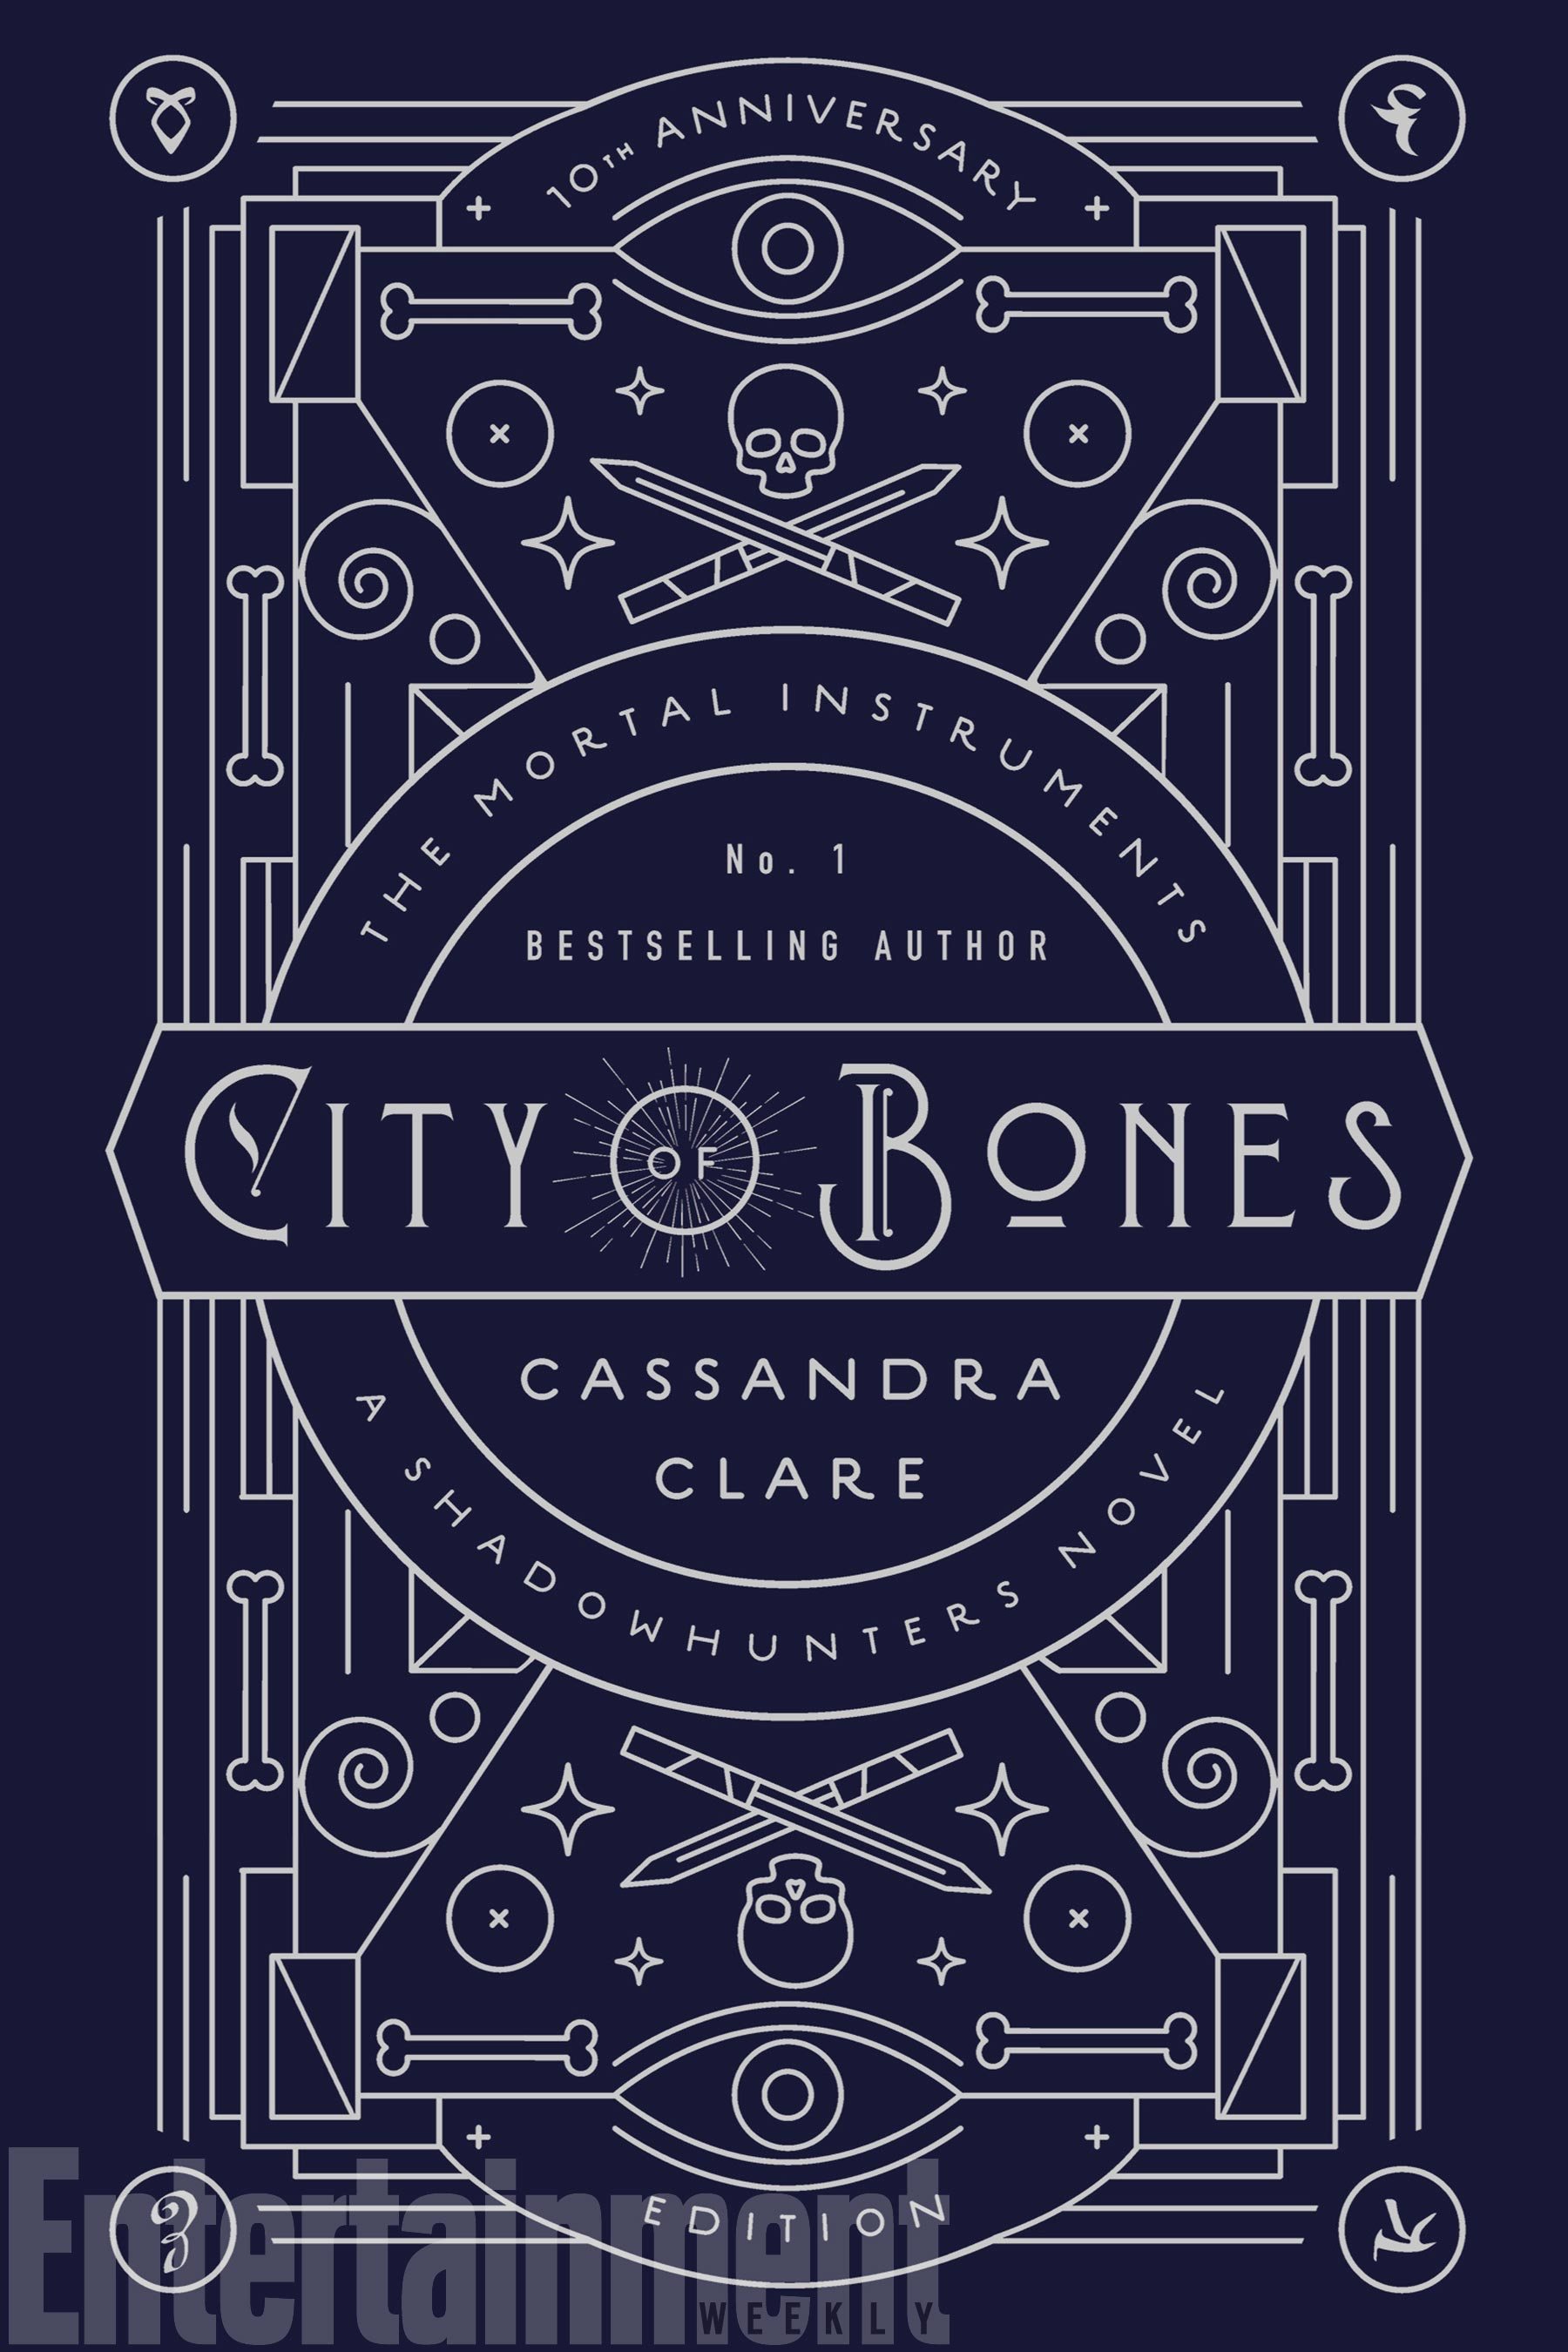 Happy release day to Cassandra Clare and Cassandra Jean!